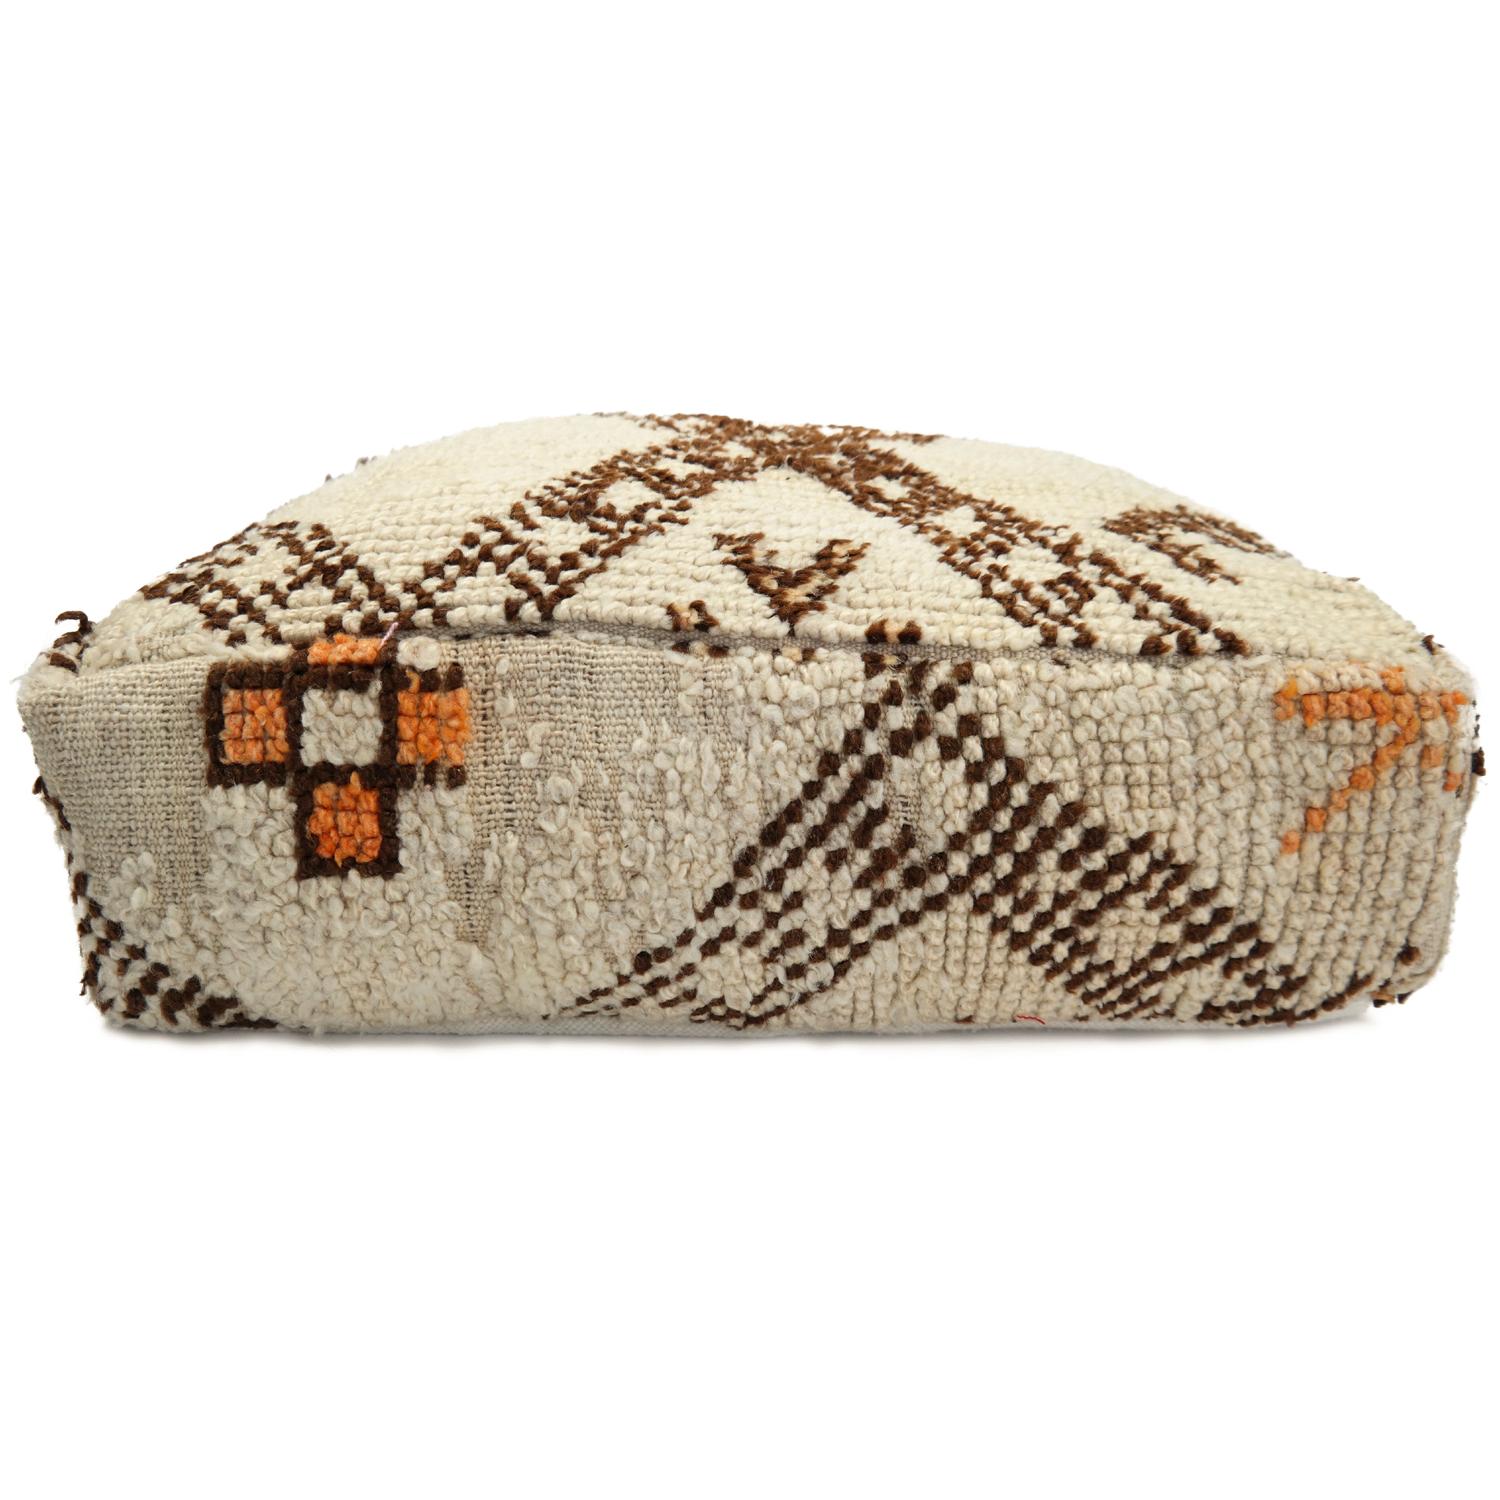 Pouf from Morocco Natural Floor Cushion Moroccan Ottoman In Fair Condition For Sale In Zaandam, NL